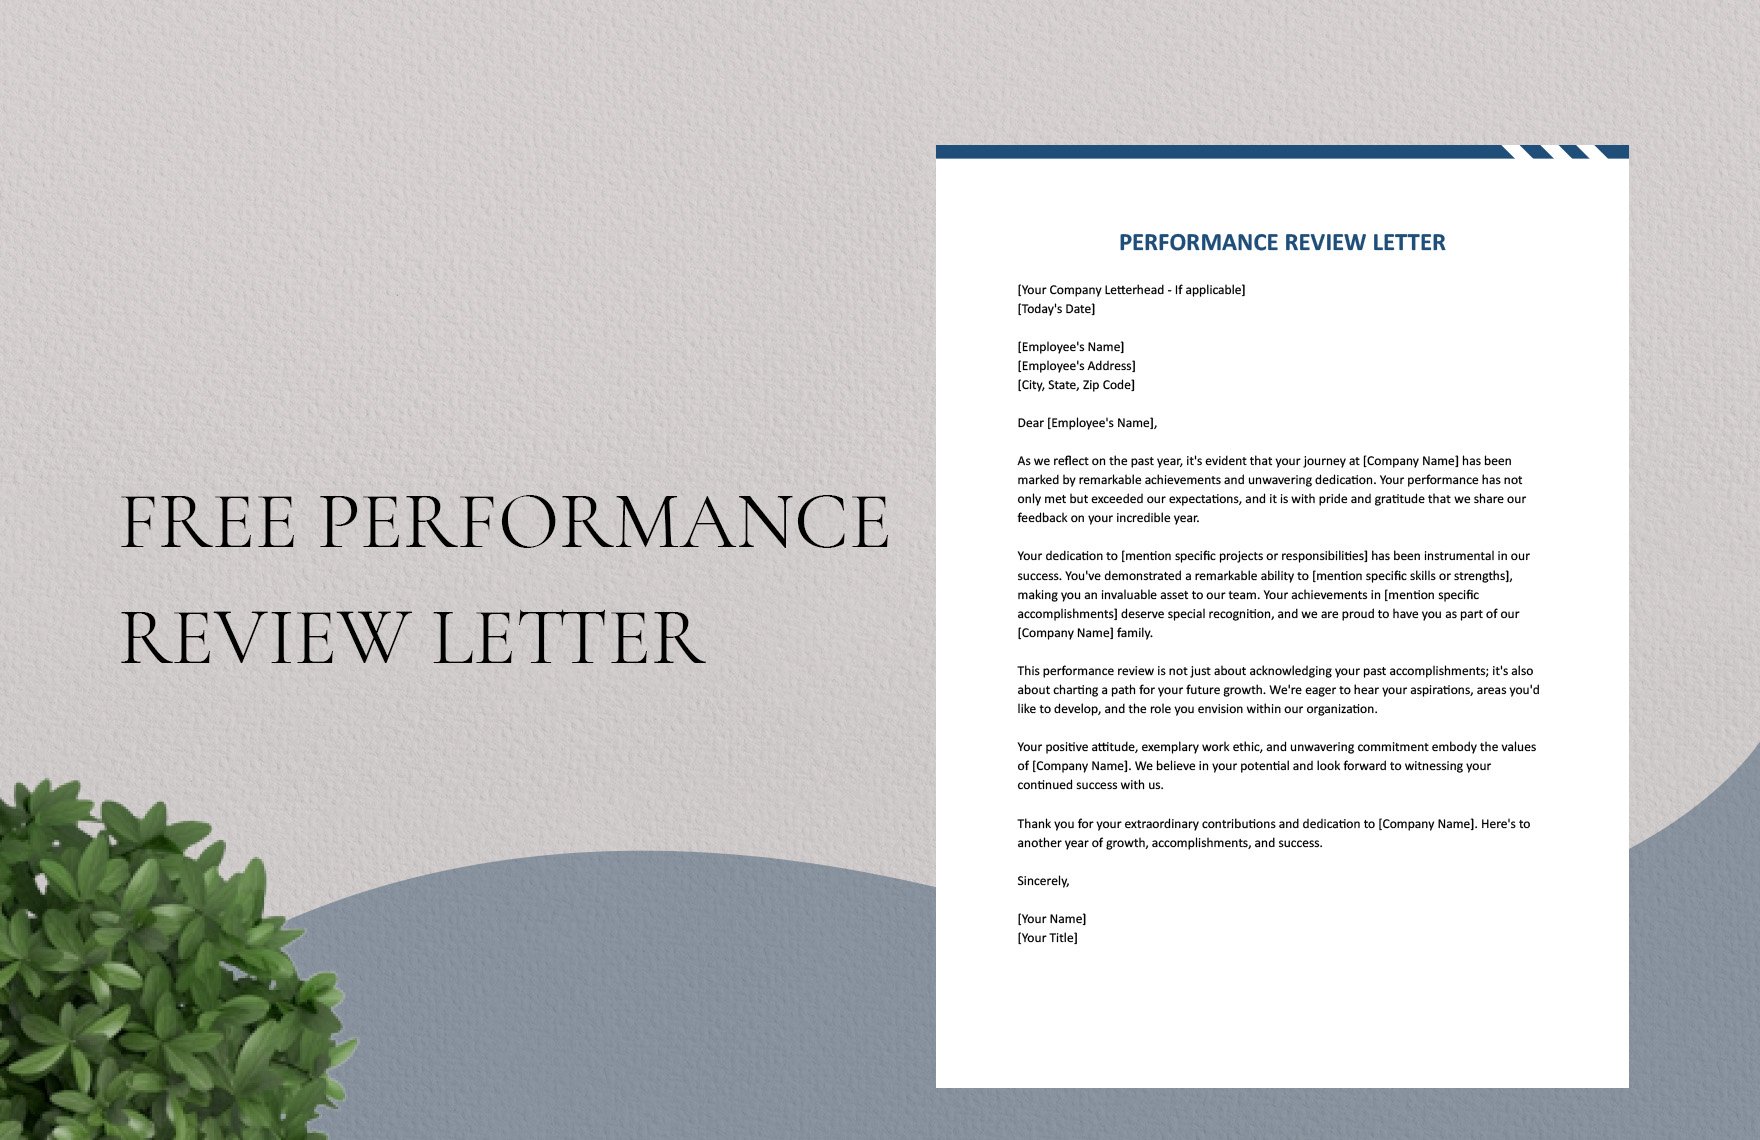 Performance Review Letter in Word, Google Docs